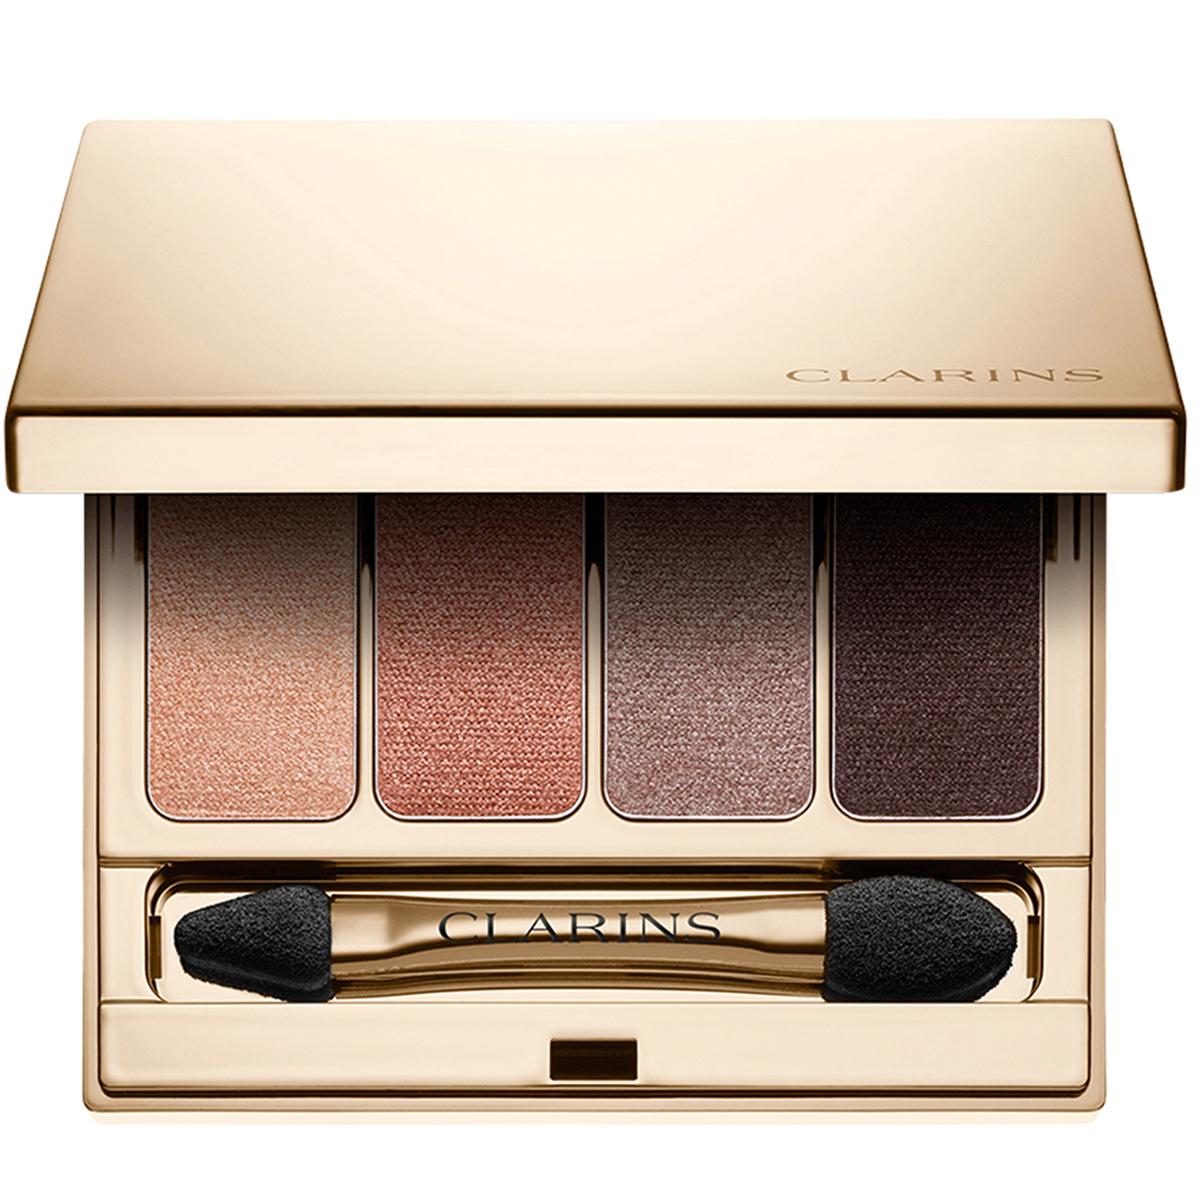 Clarins 4 Colour Eyeshadow Palette 01 Nude